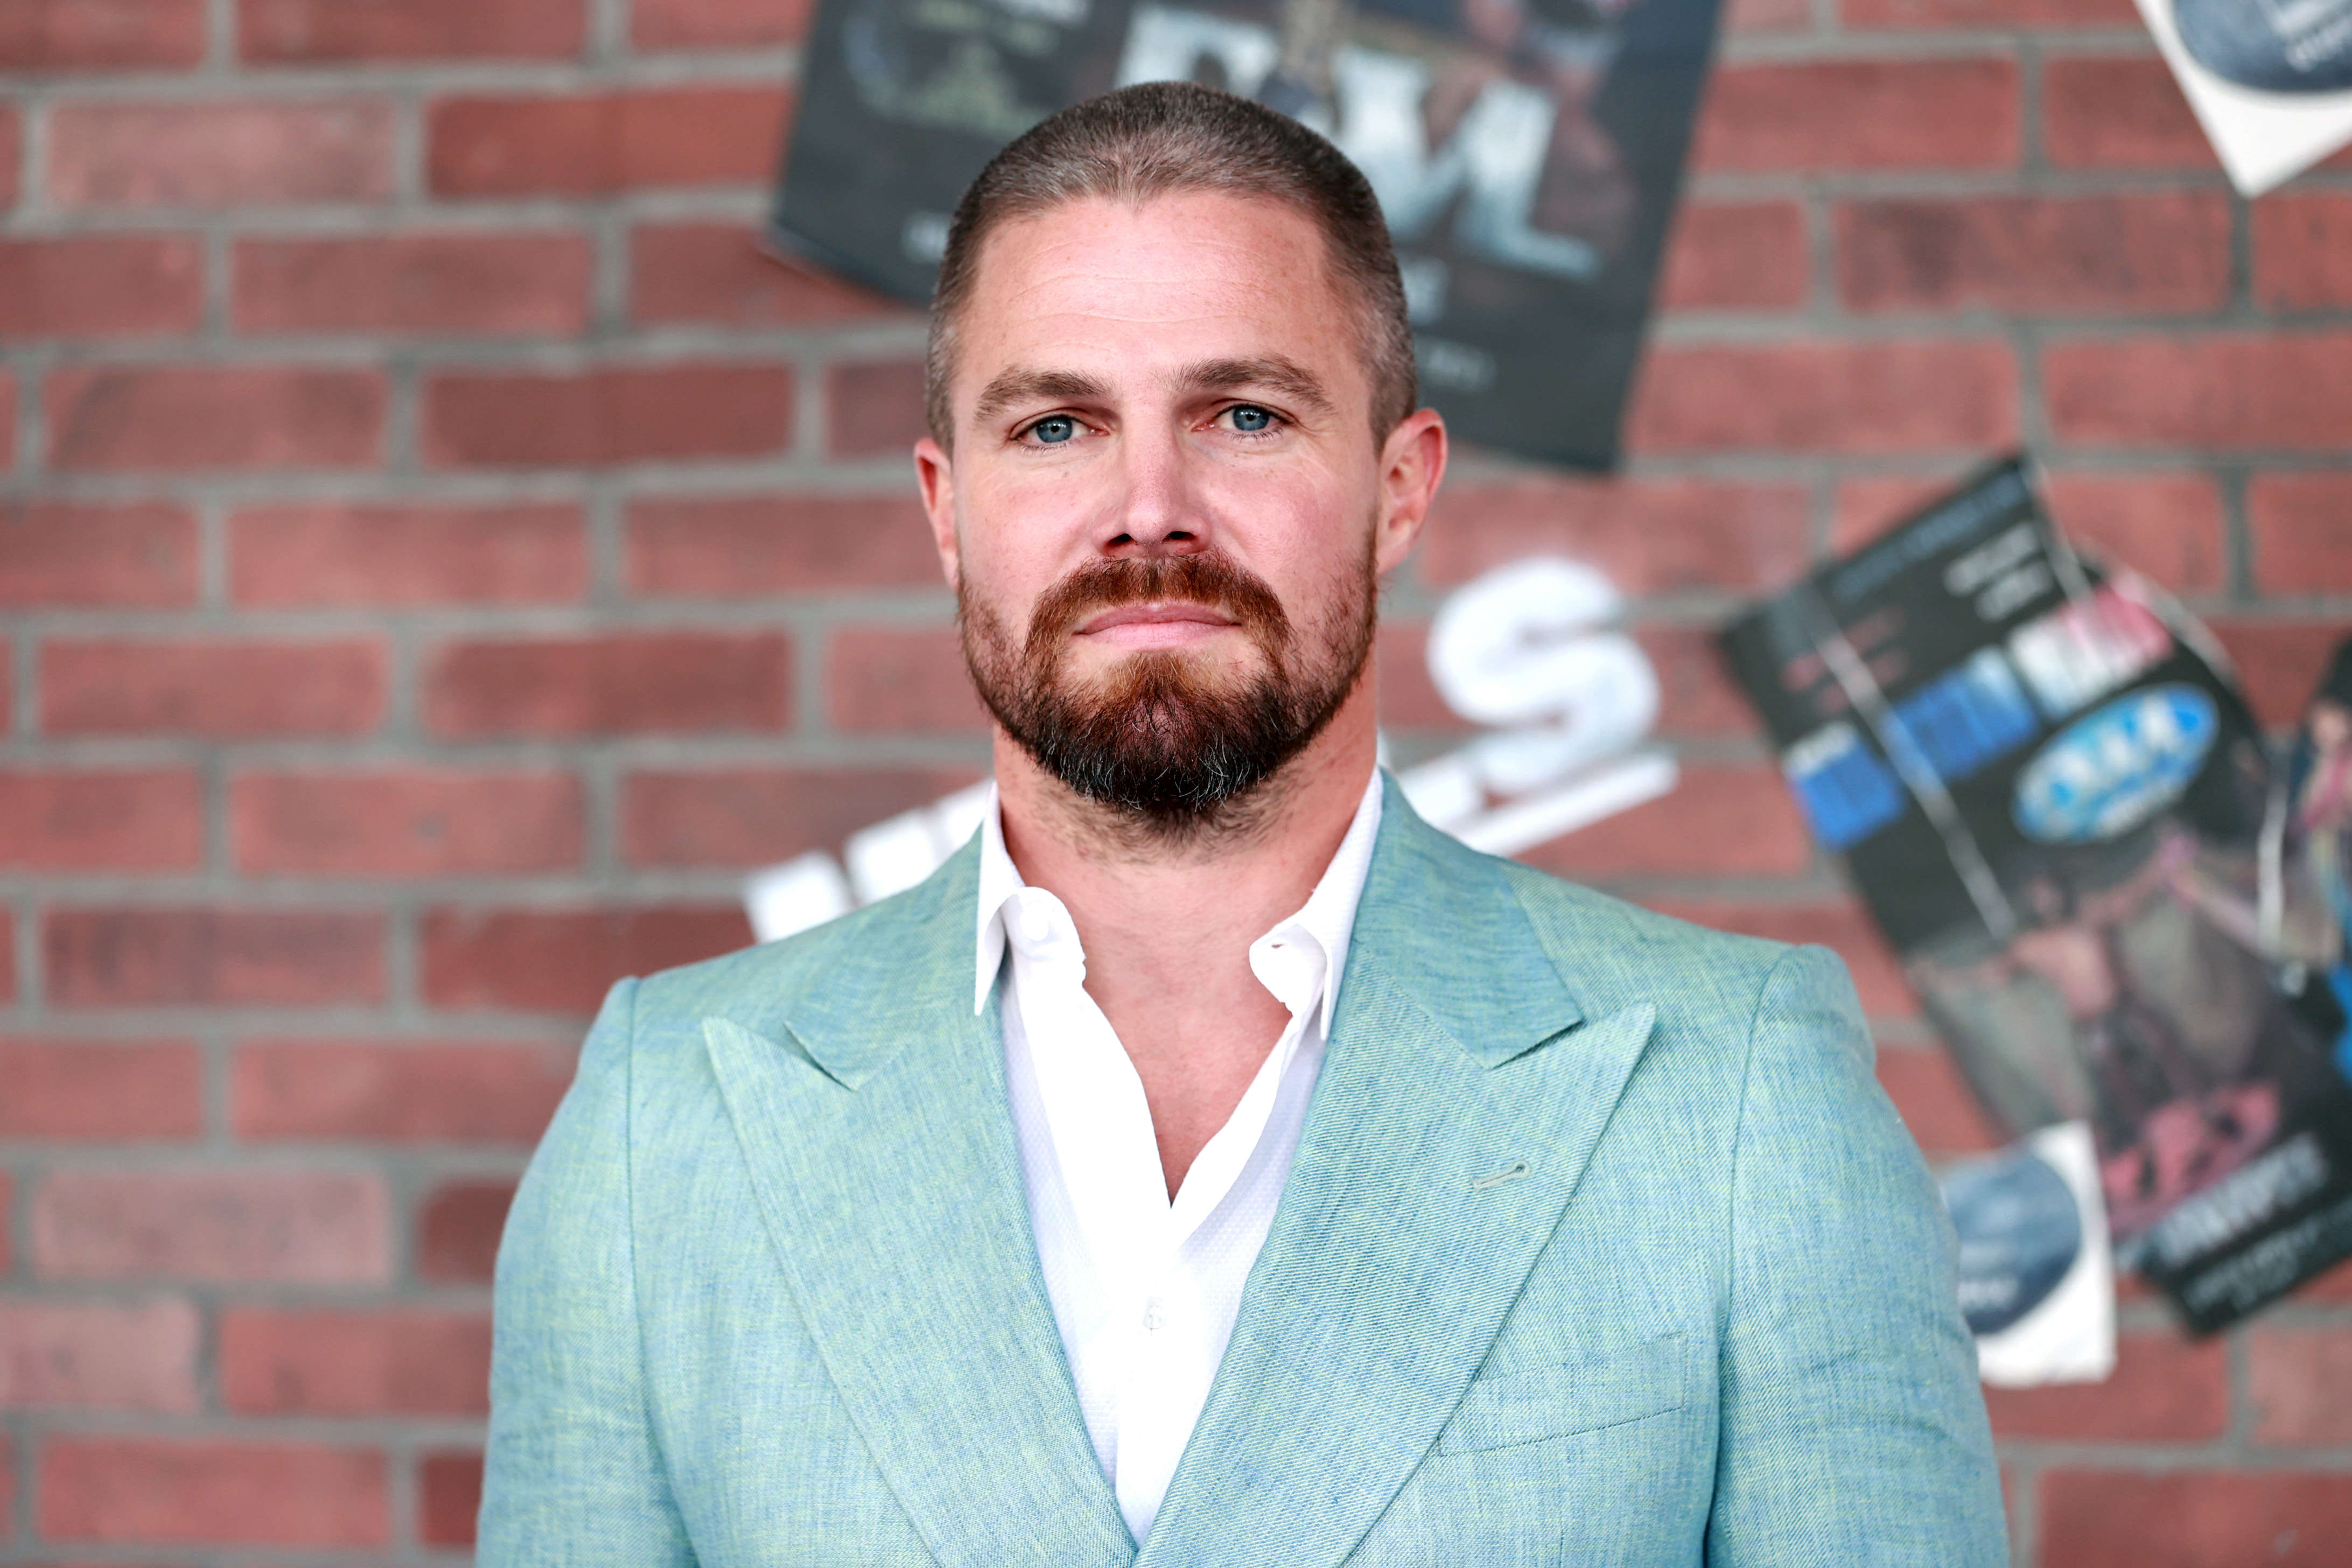 Stephen Amell apologizes for disorderly conduct on a Delta flight